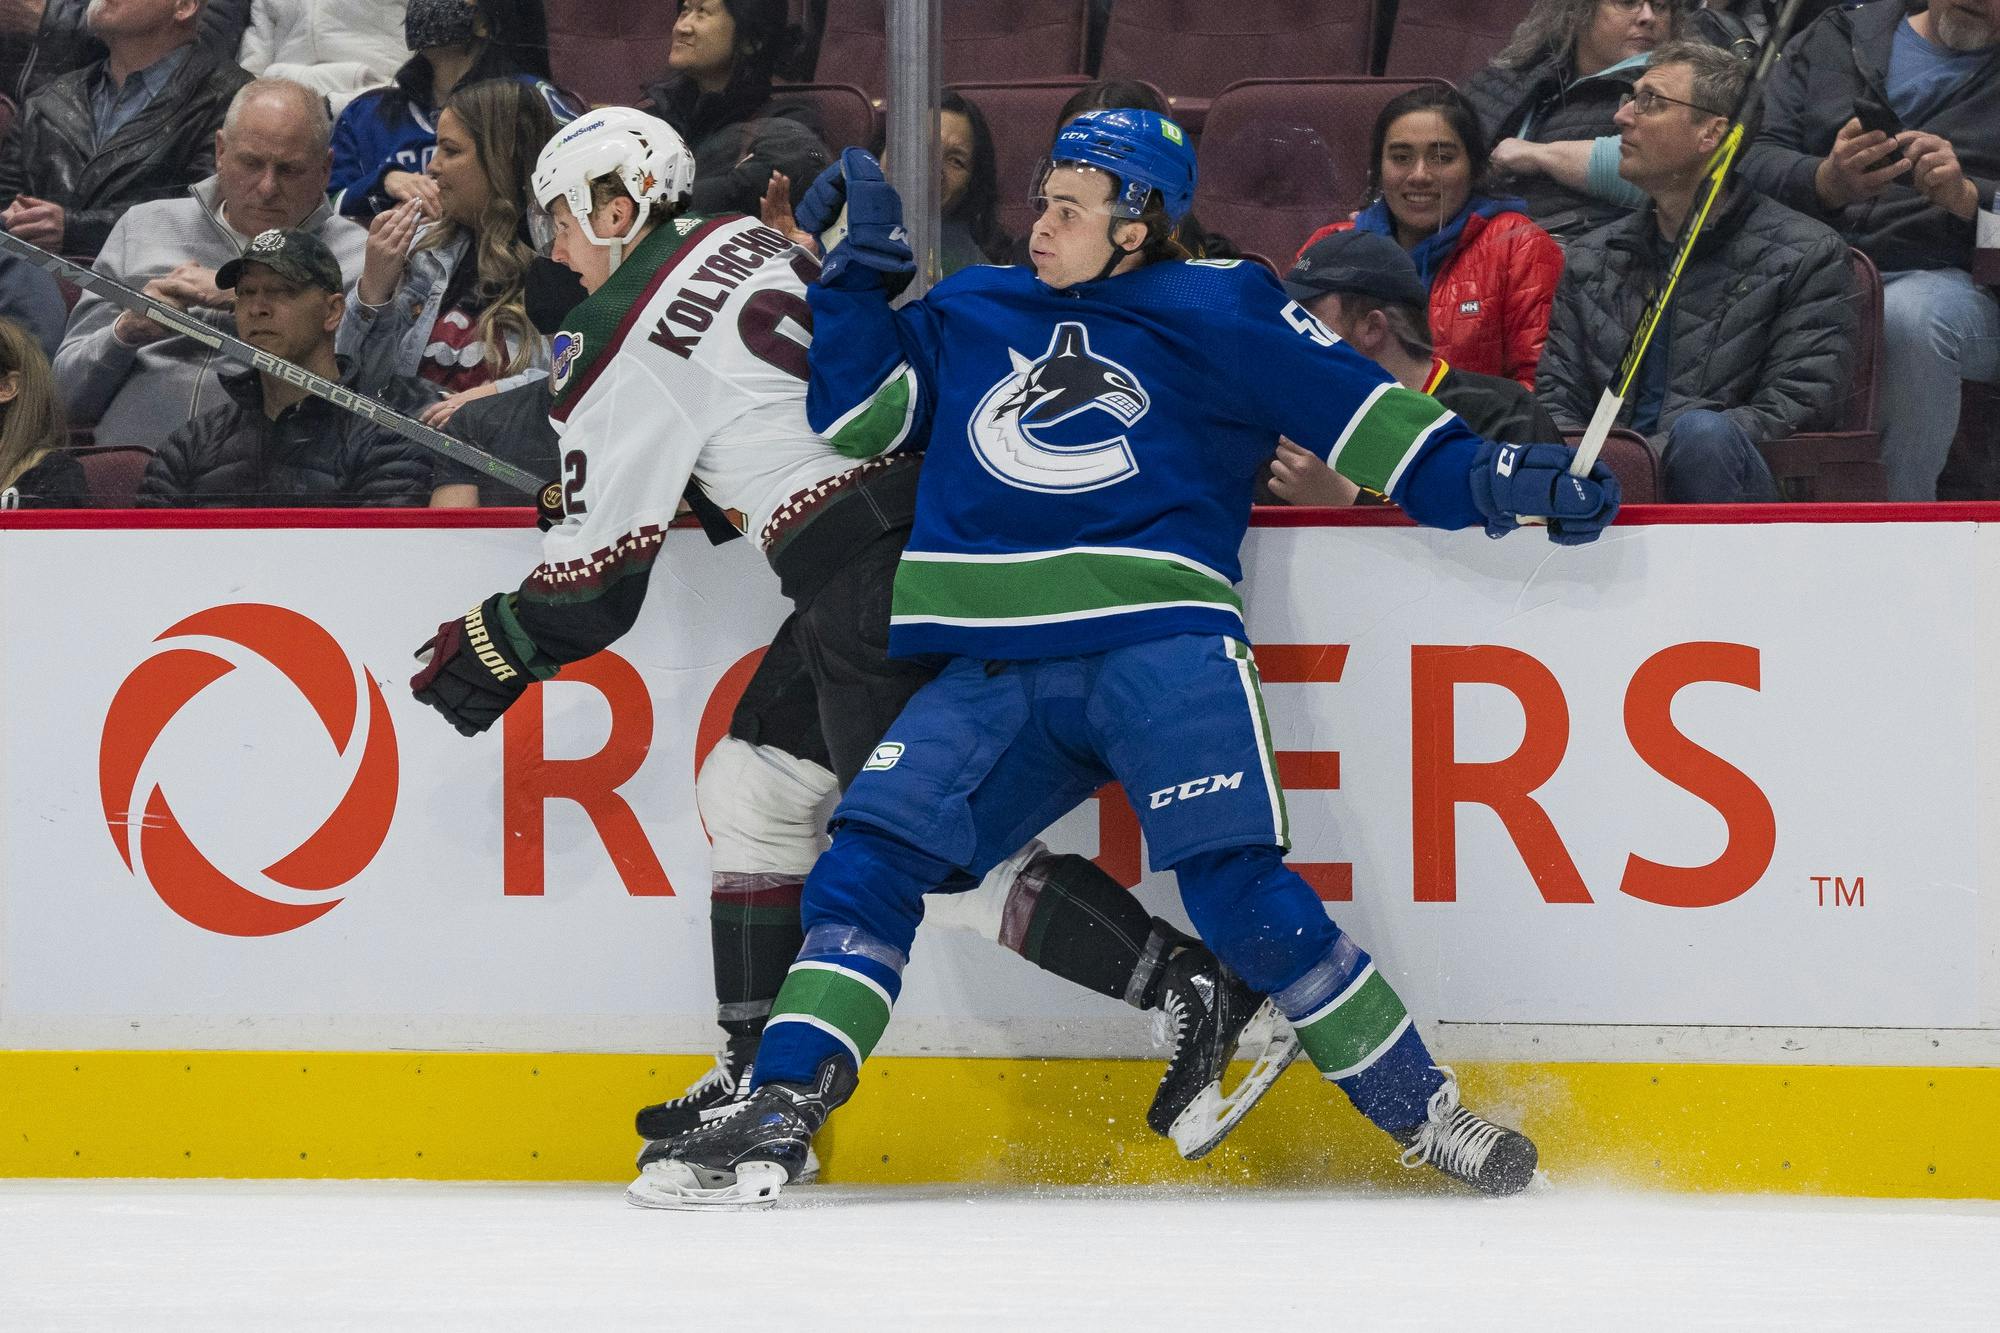 Vancouver Canucks call up forward Phil Di Giuseppe from Abbotsford